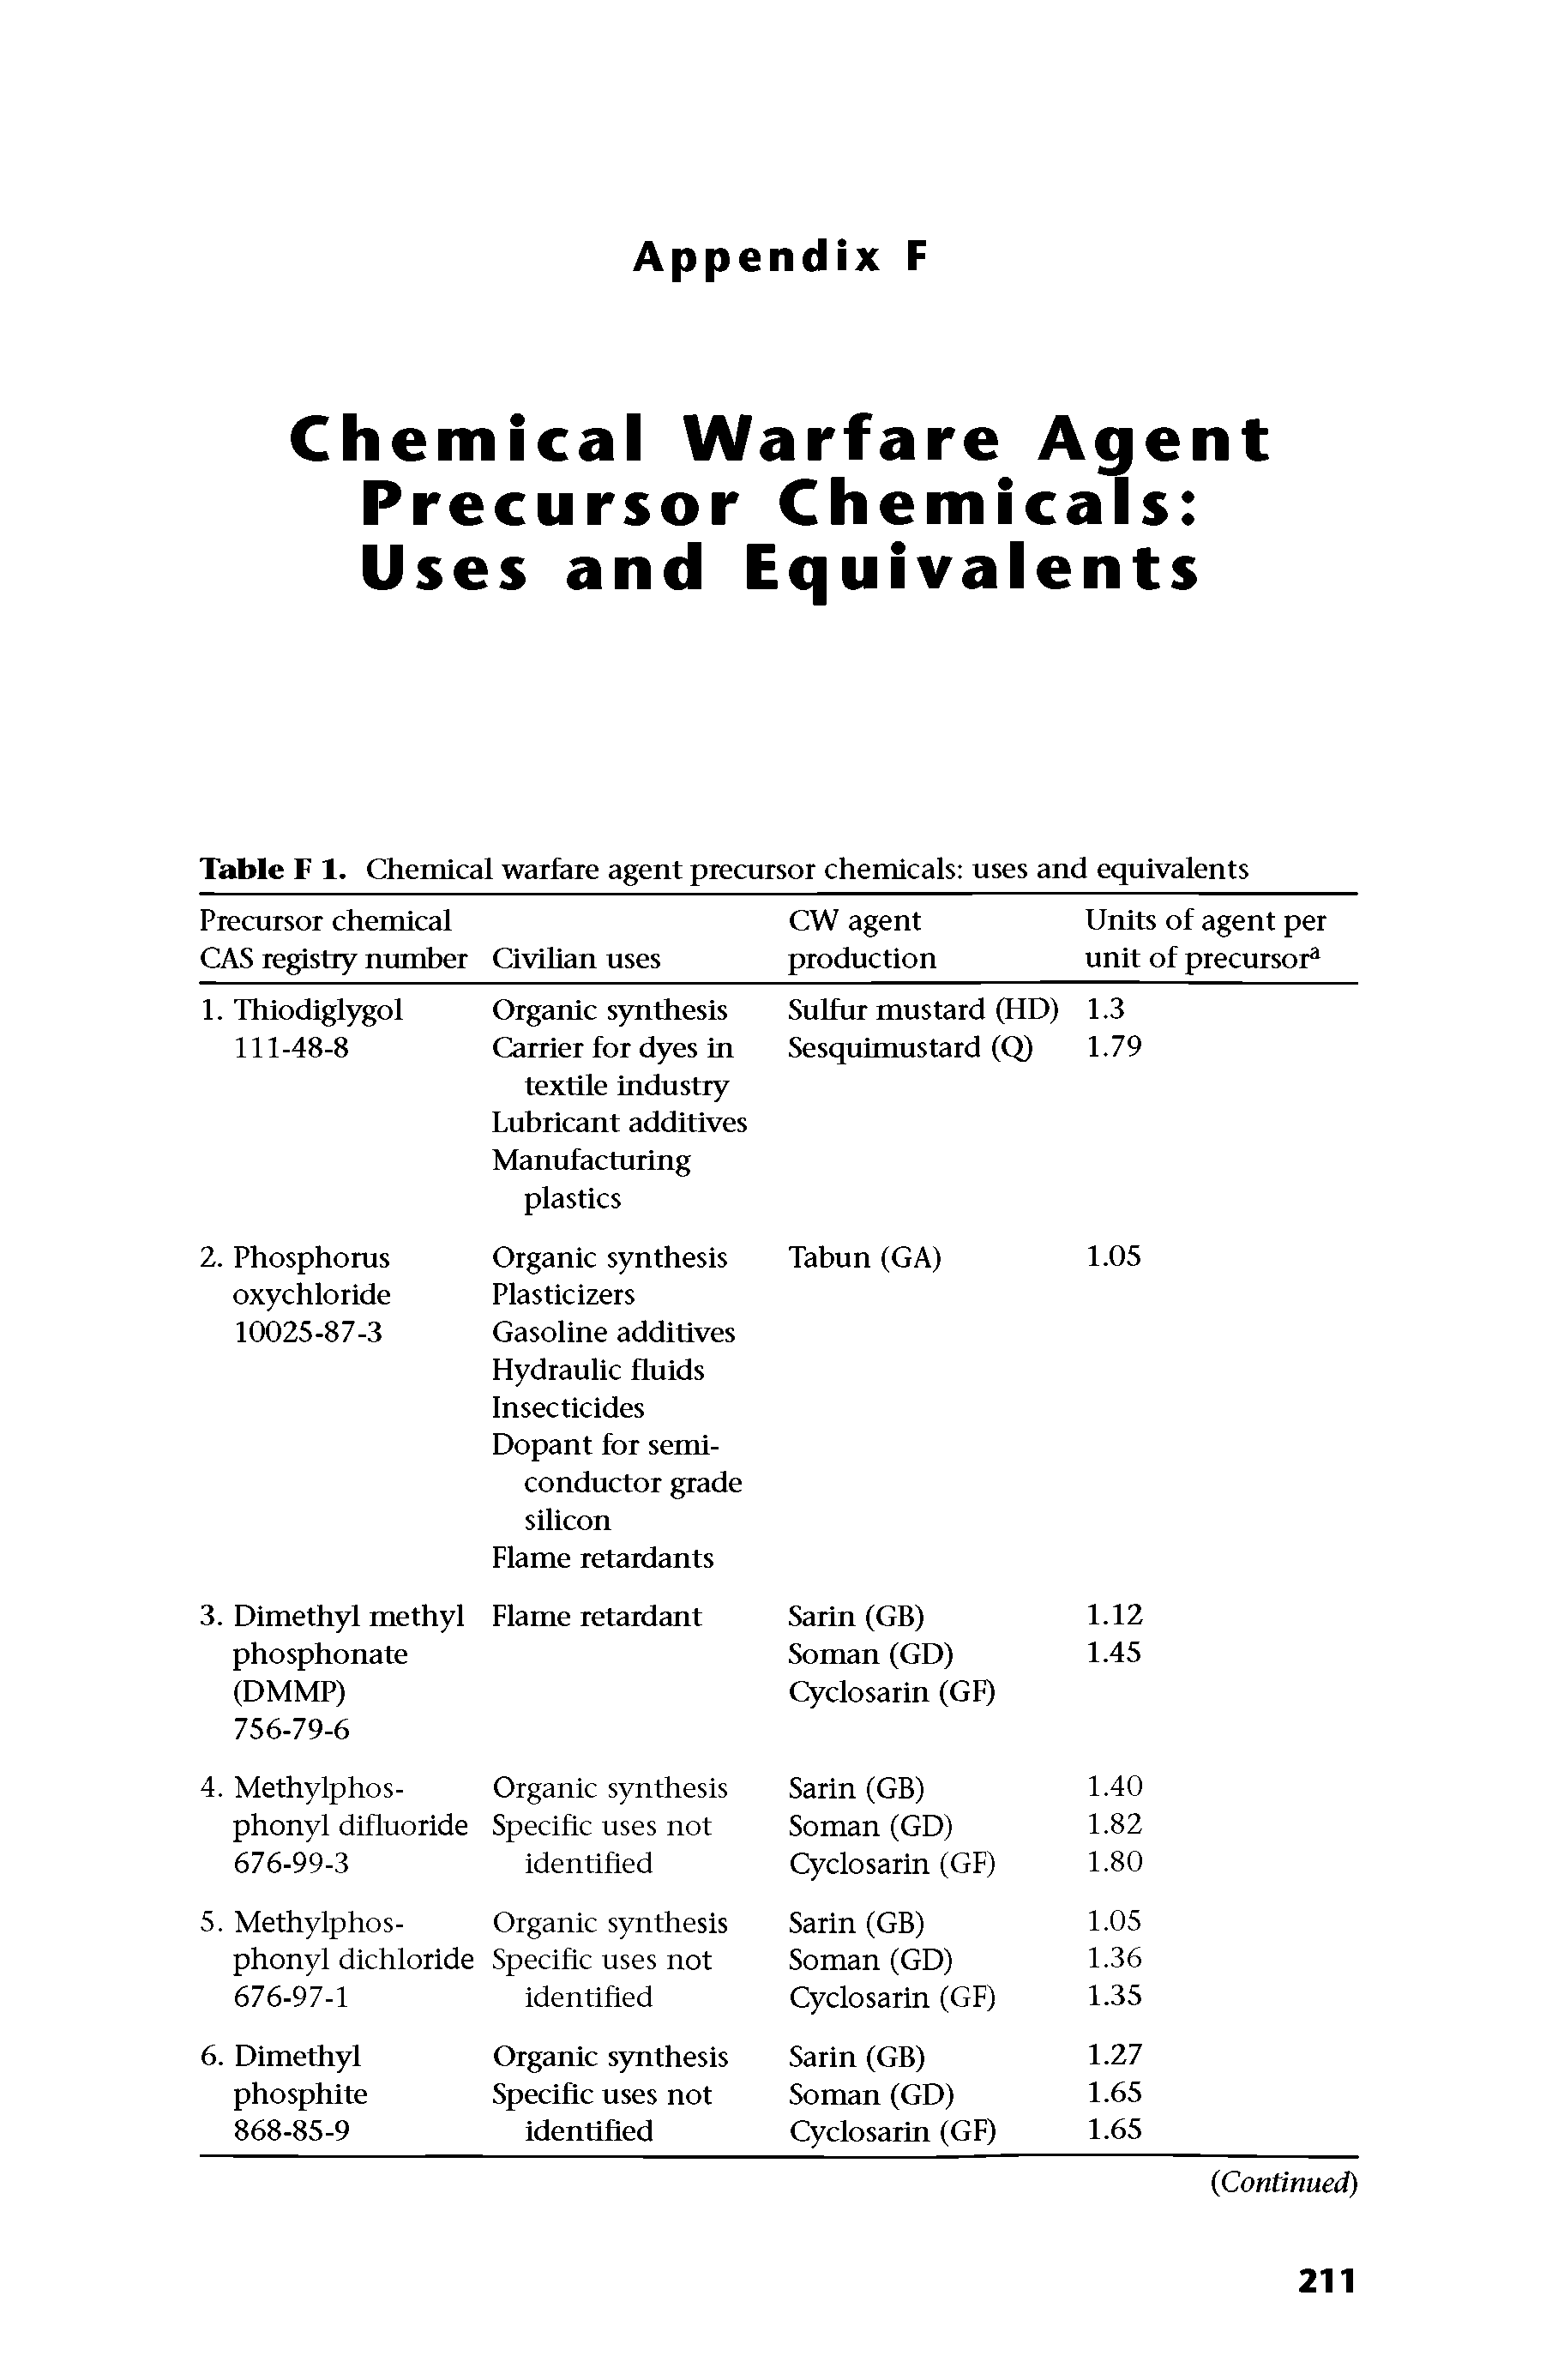 Table F 1. Chemical warfare agent precursor chemicals uses and equivalents...